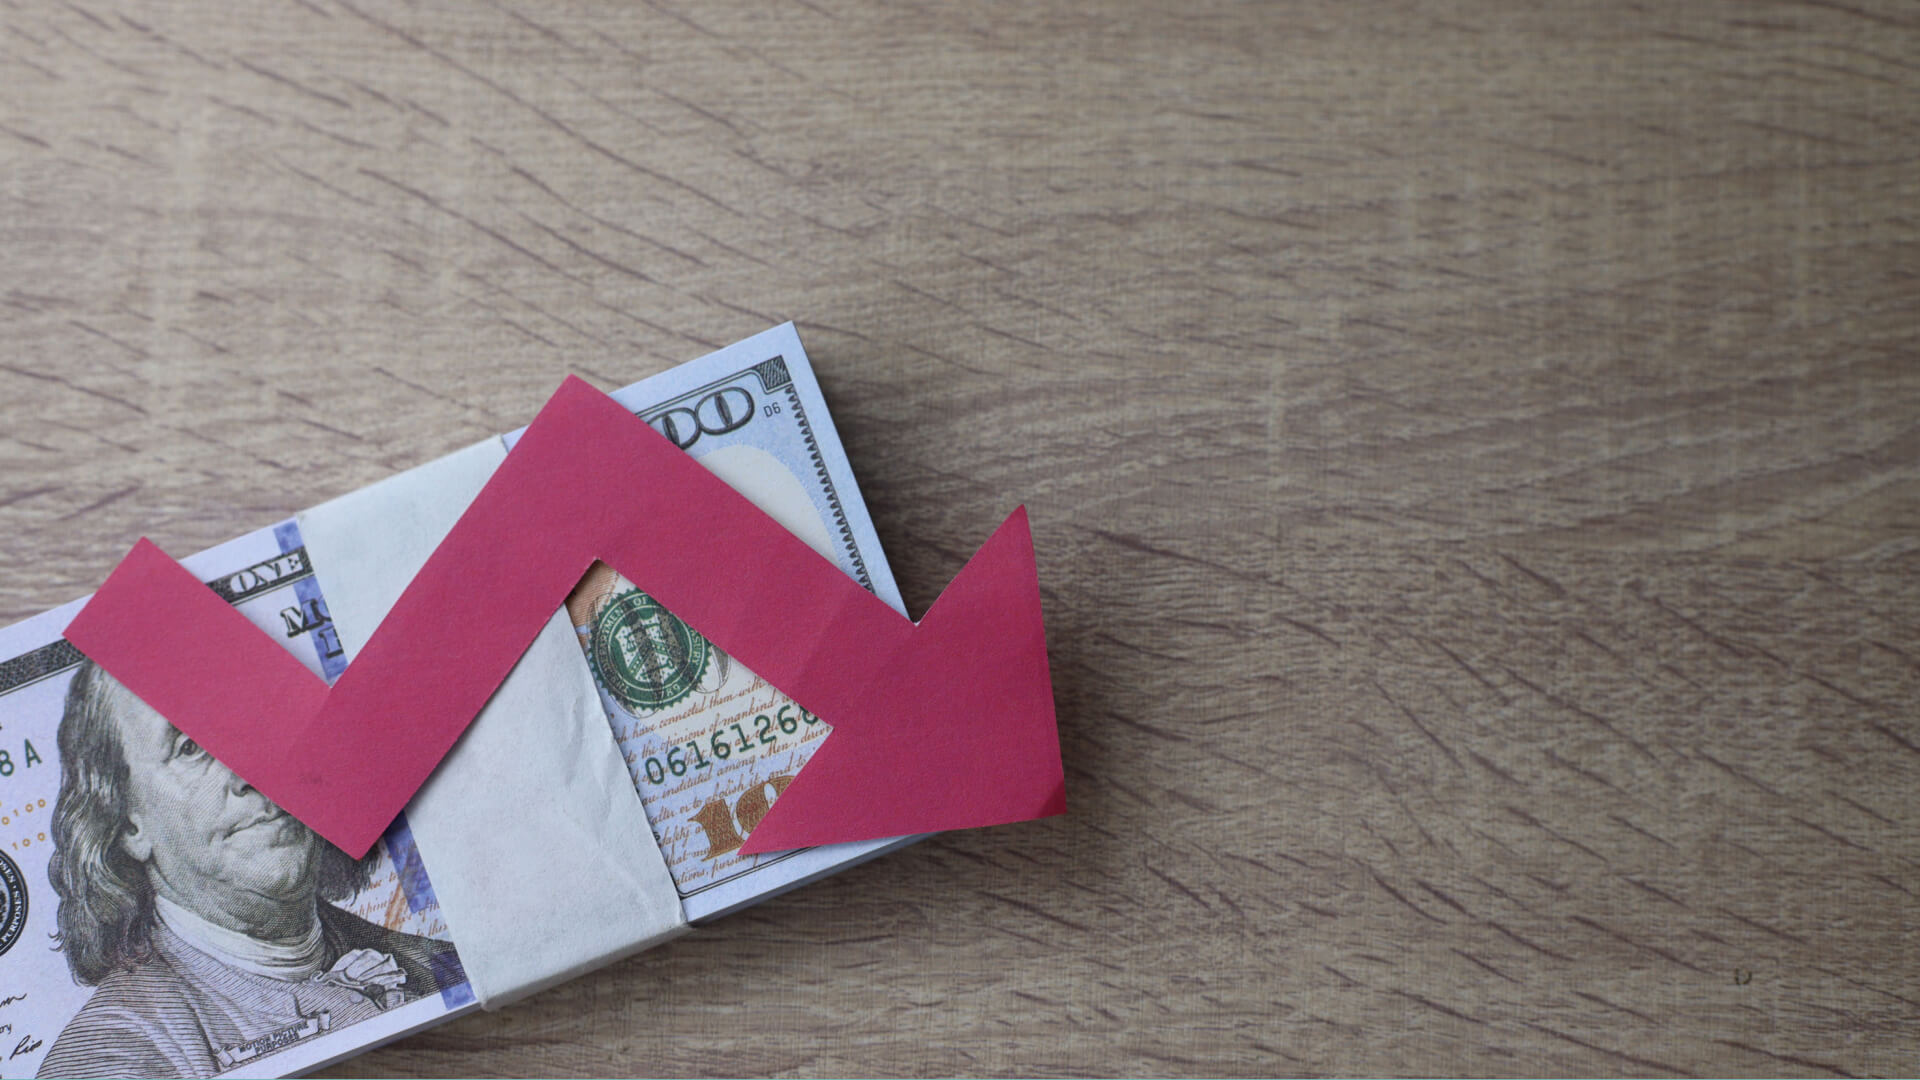 a red arrow pointing down on a stack of money